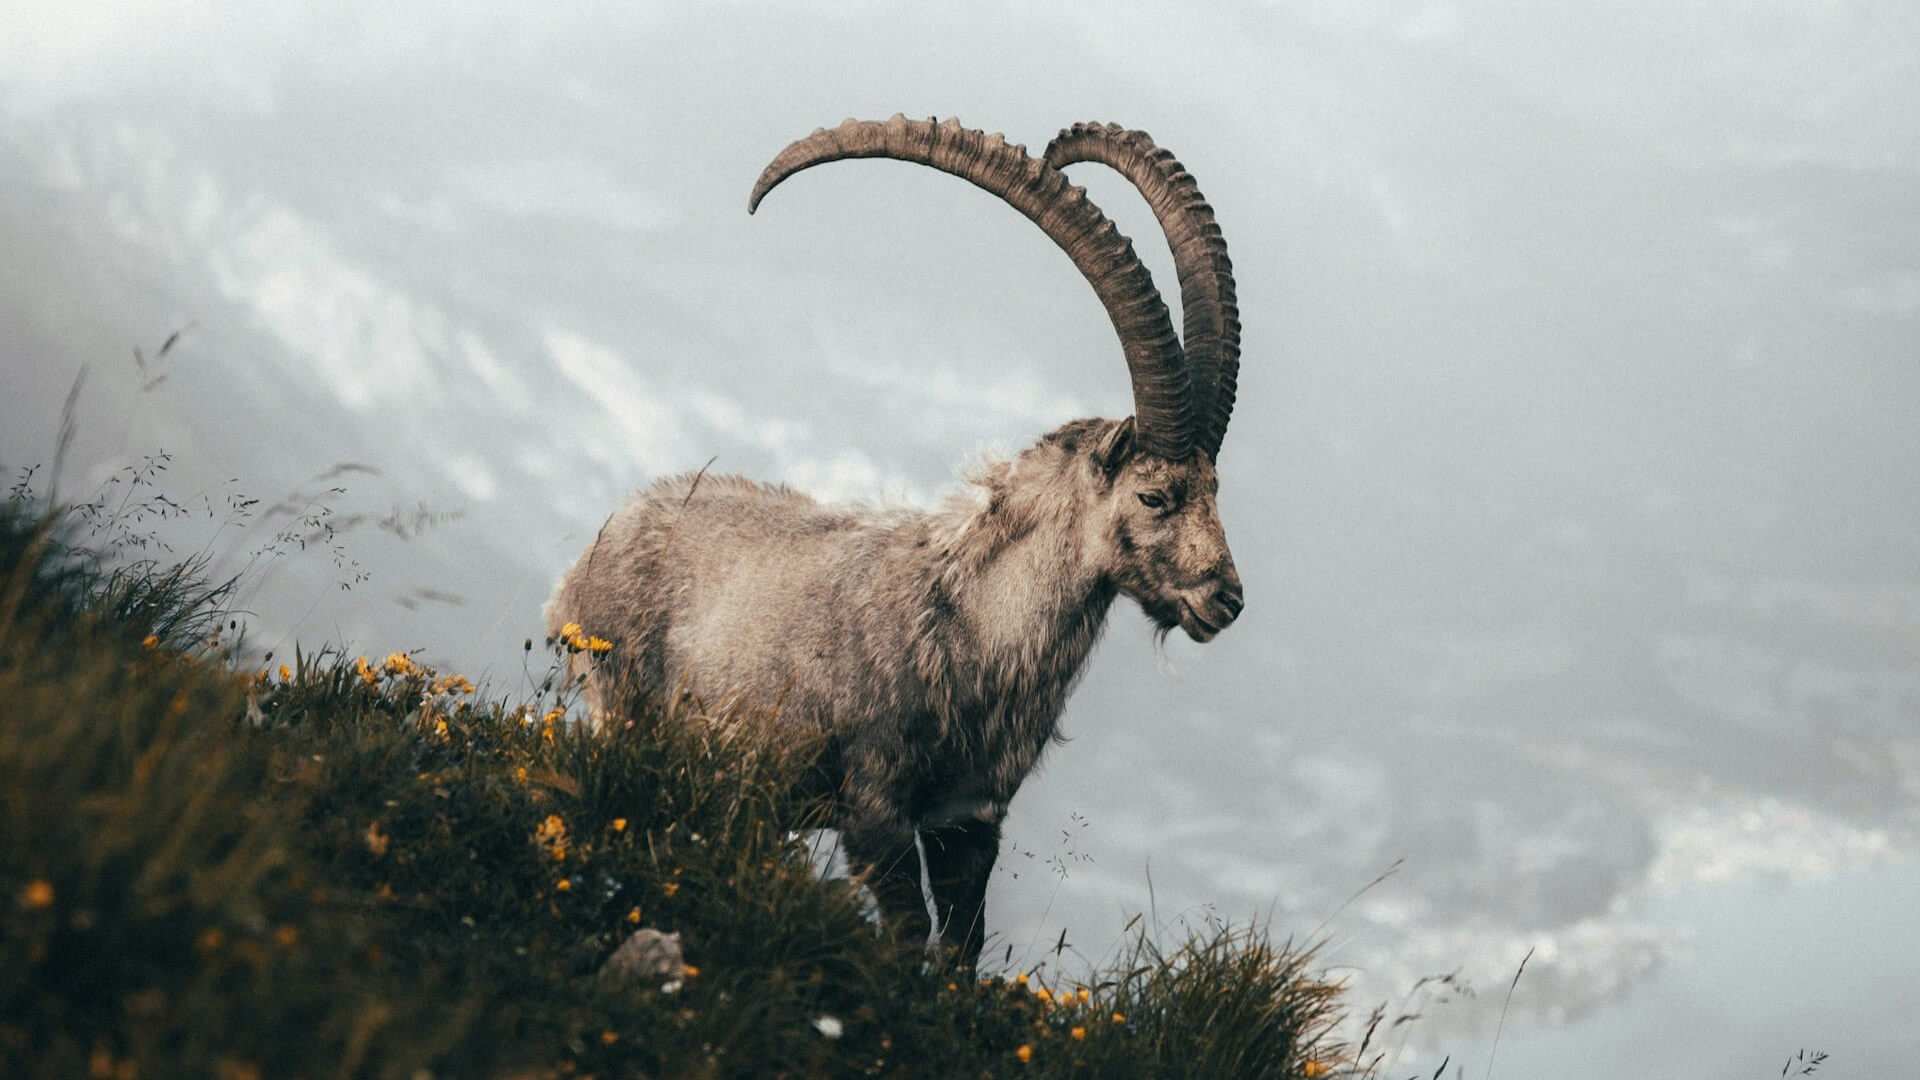 An Alpine Ibex, also known as a Steinbock, in the mountains